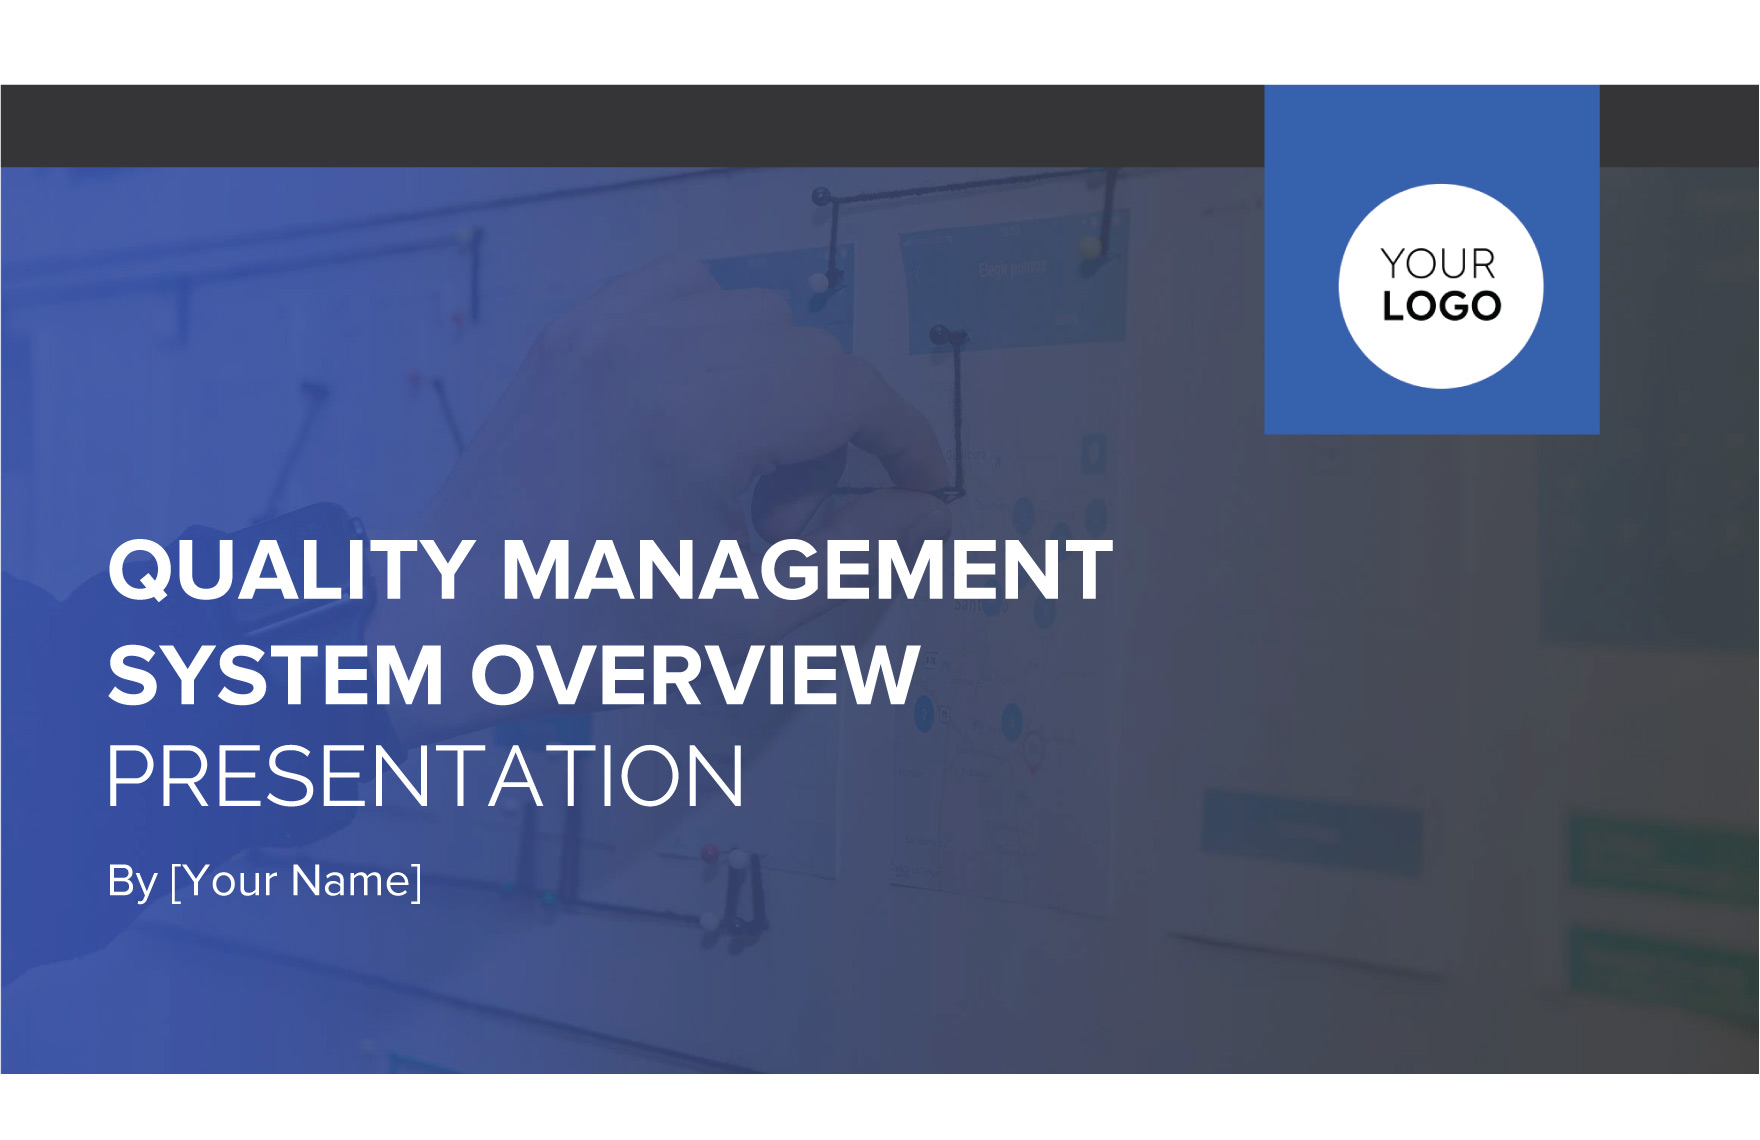 Quality Management System Overview Presentation Template